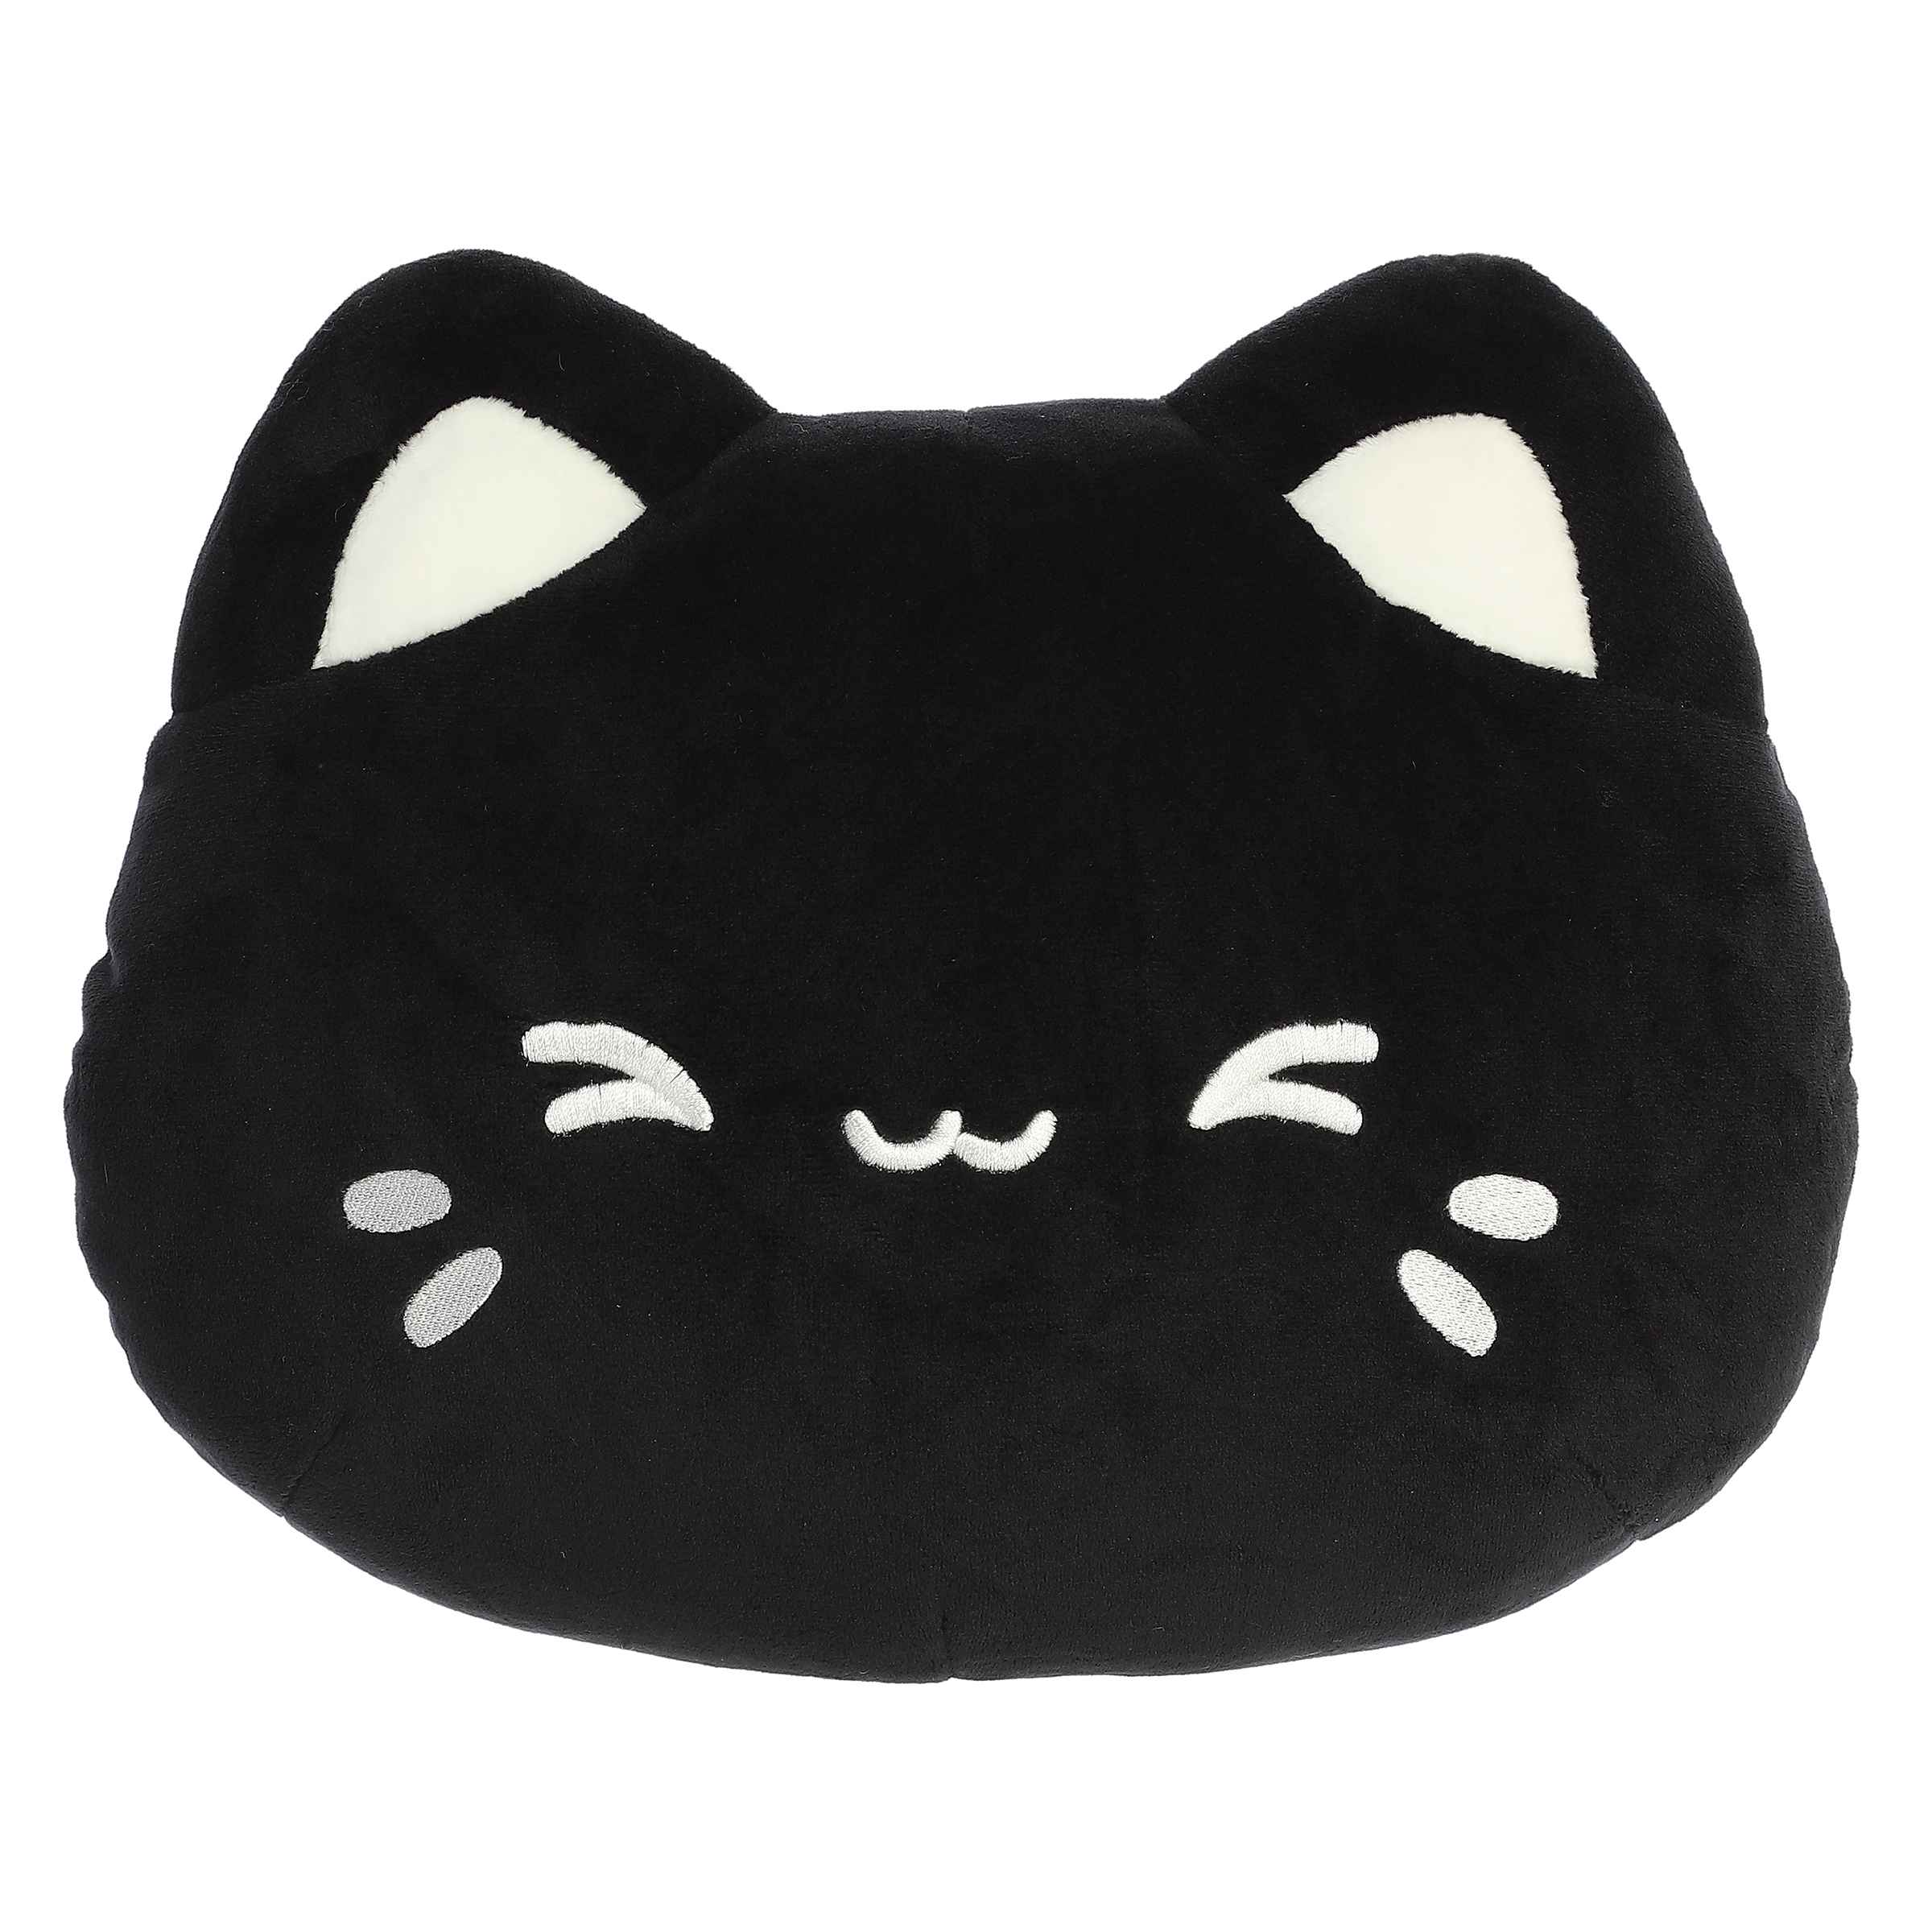 Black Sesame Meowchi Face Plush from Tasty Peach, rich black plush, adorable closed-eye face, perfect for comfort